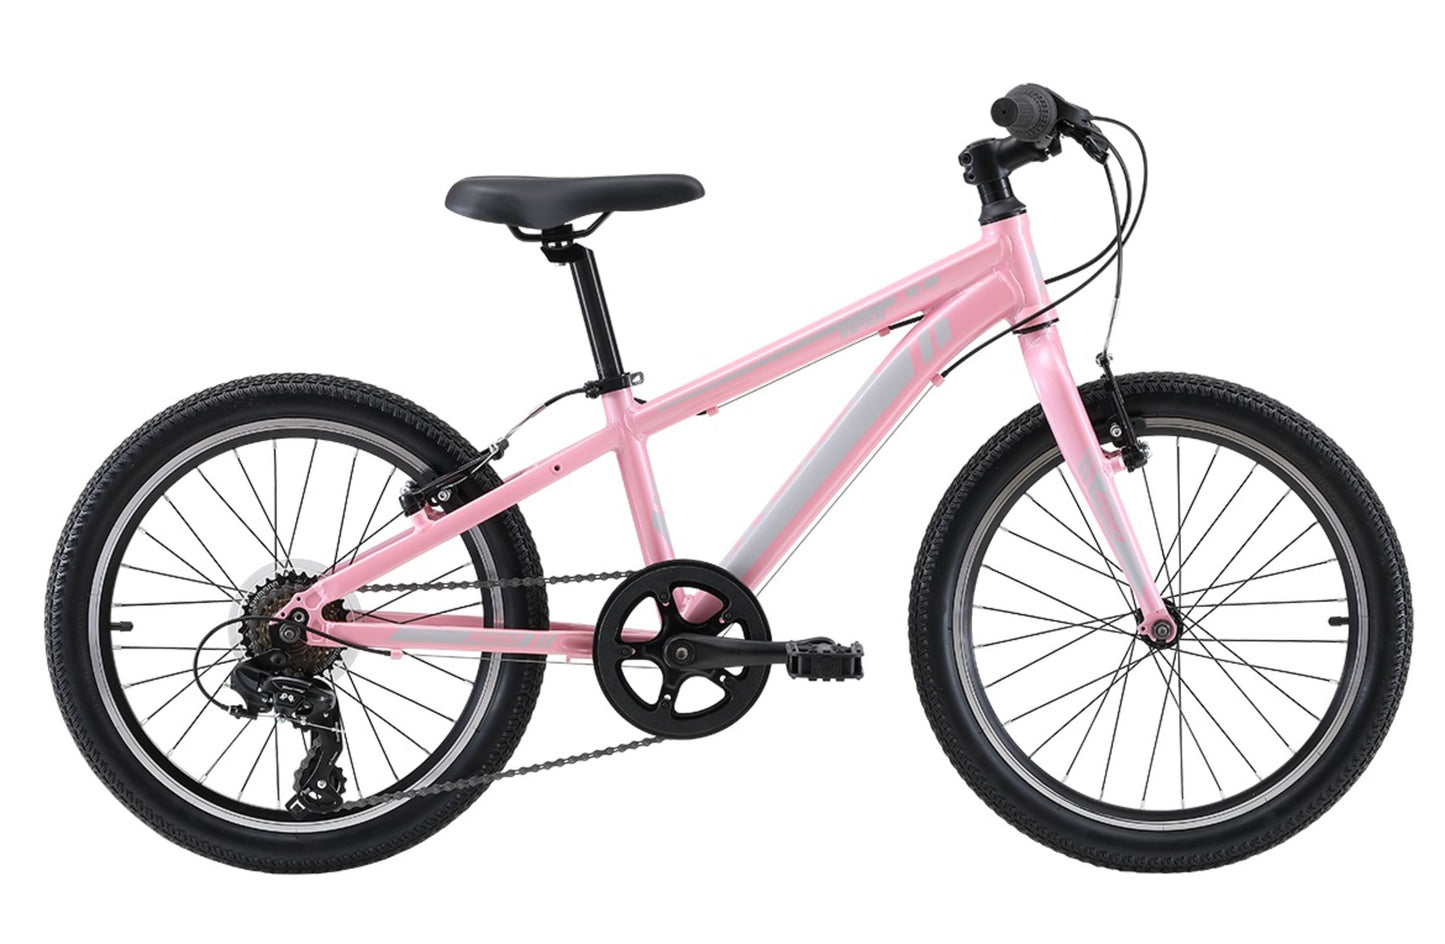 Viper 20" Kids Bike in Pink with Shimano 7-speed gearing from Reid Cycles Australia 